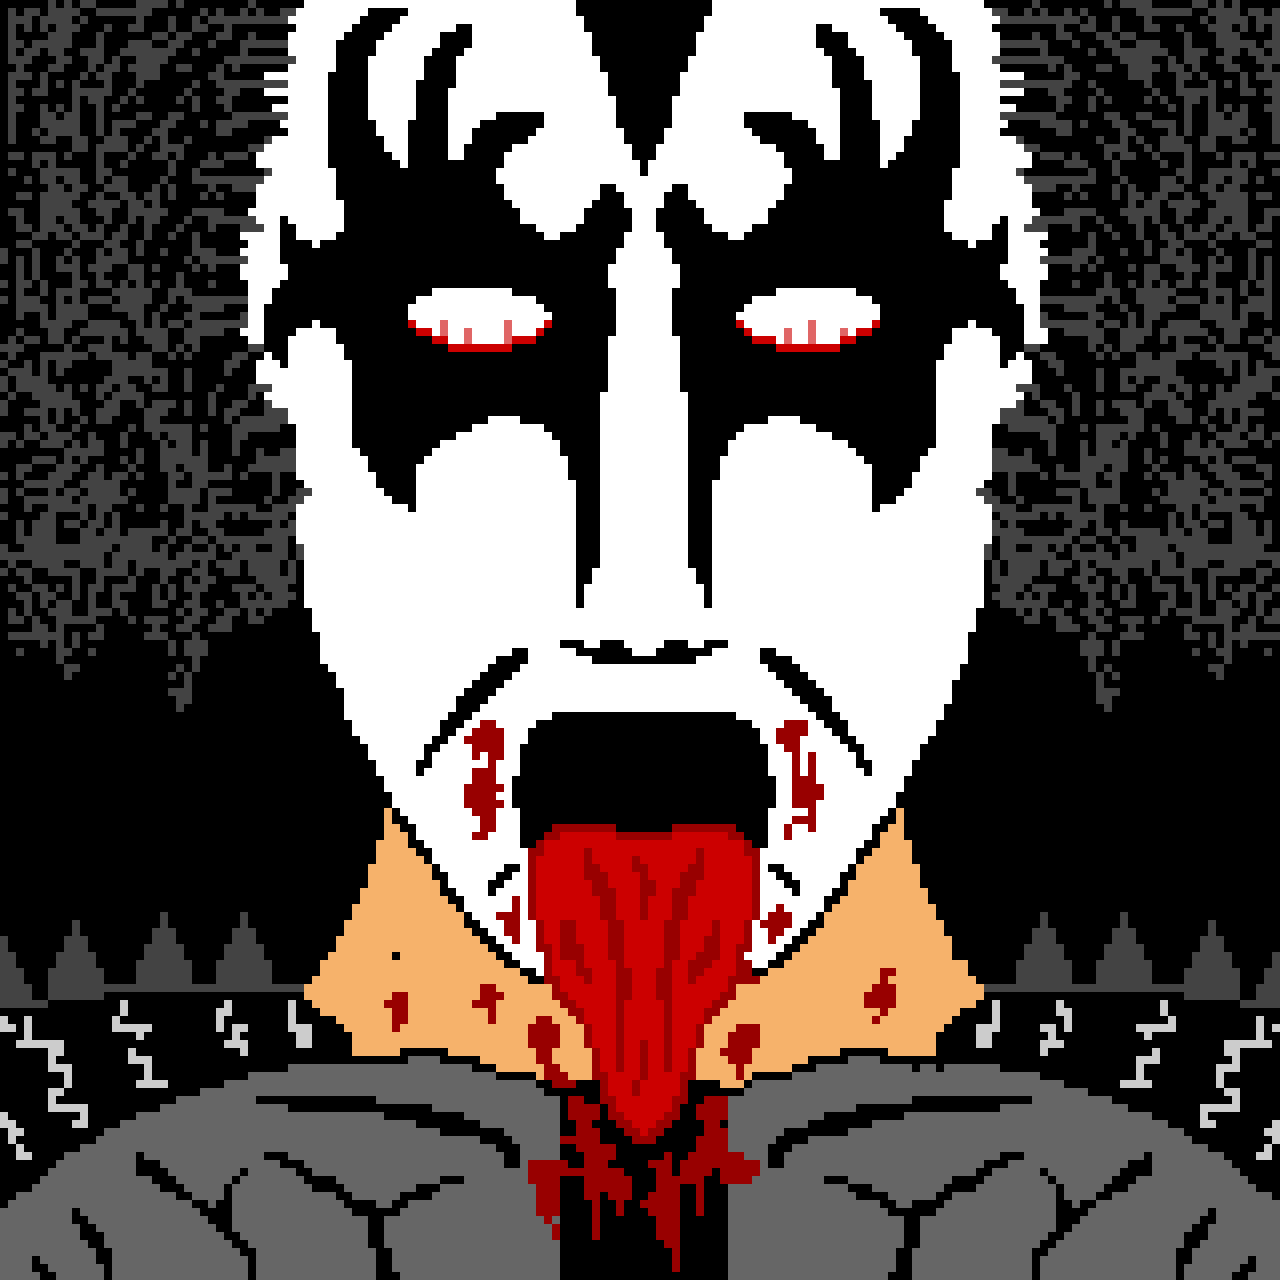 Gene Simmons from KISS (Comment if you know who this is)